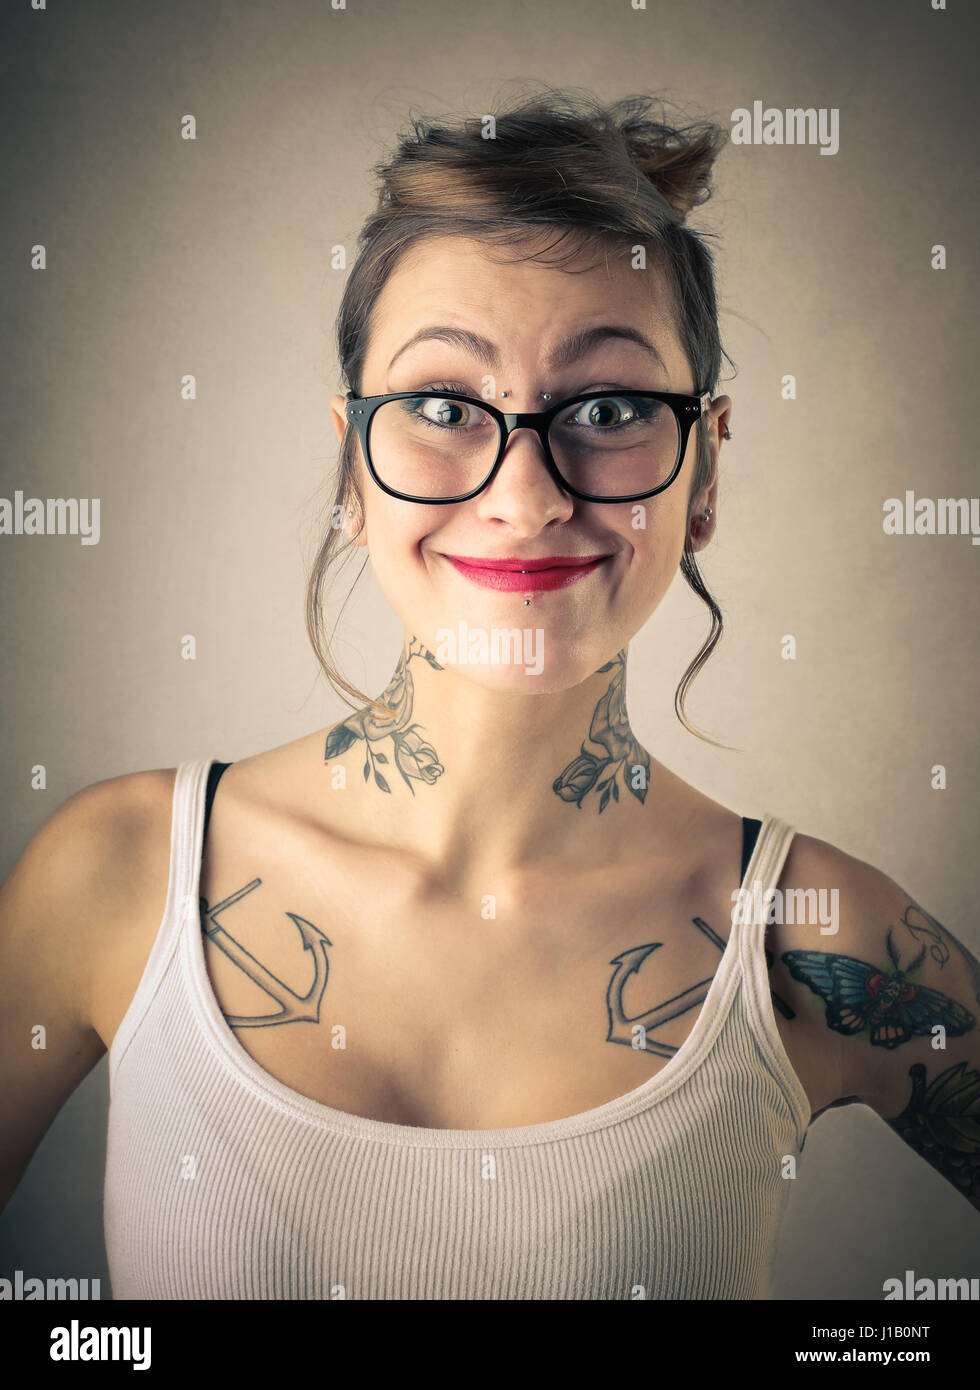 Tattooed woman smiling in glasses Stock Photo